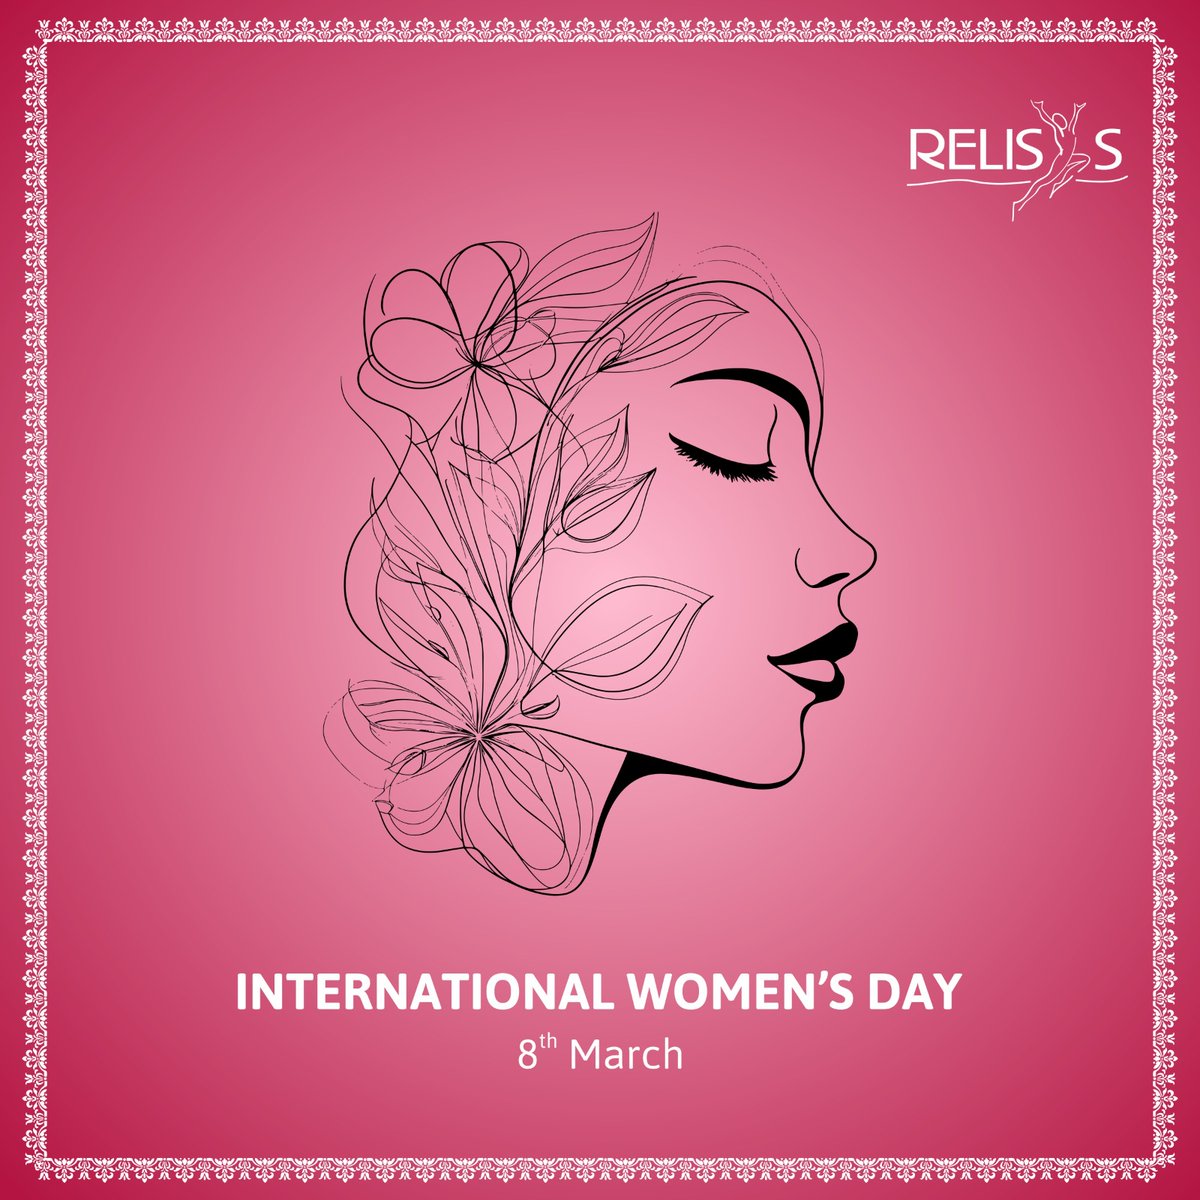 On this #WomensDay, let's ponder a while on the importance of #Women's #Heart #Health. Happy #InternationalWomensDay ! Read the full blog here:shorturl.at/qOU59 #InternationalWomensDay #WomensHealth #HeartDiseaseAwareness #HeartHealthForAll #RelisysMedicalDevices